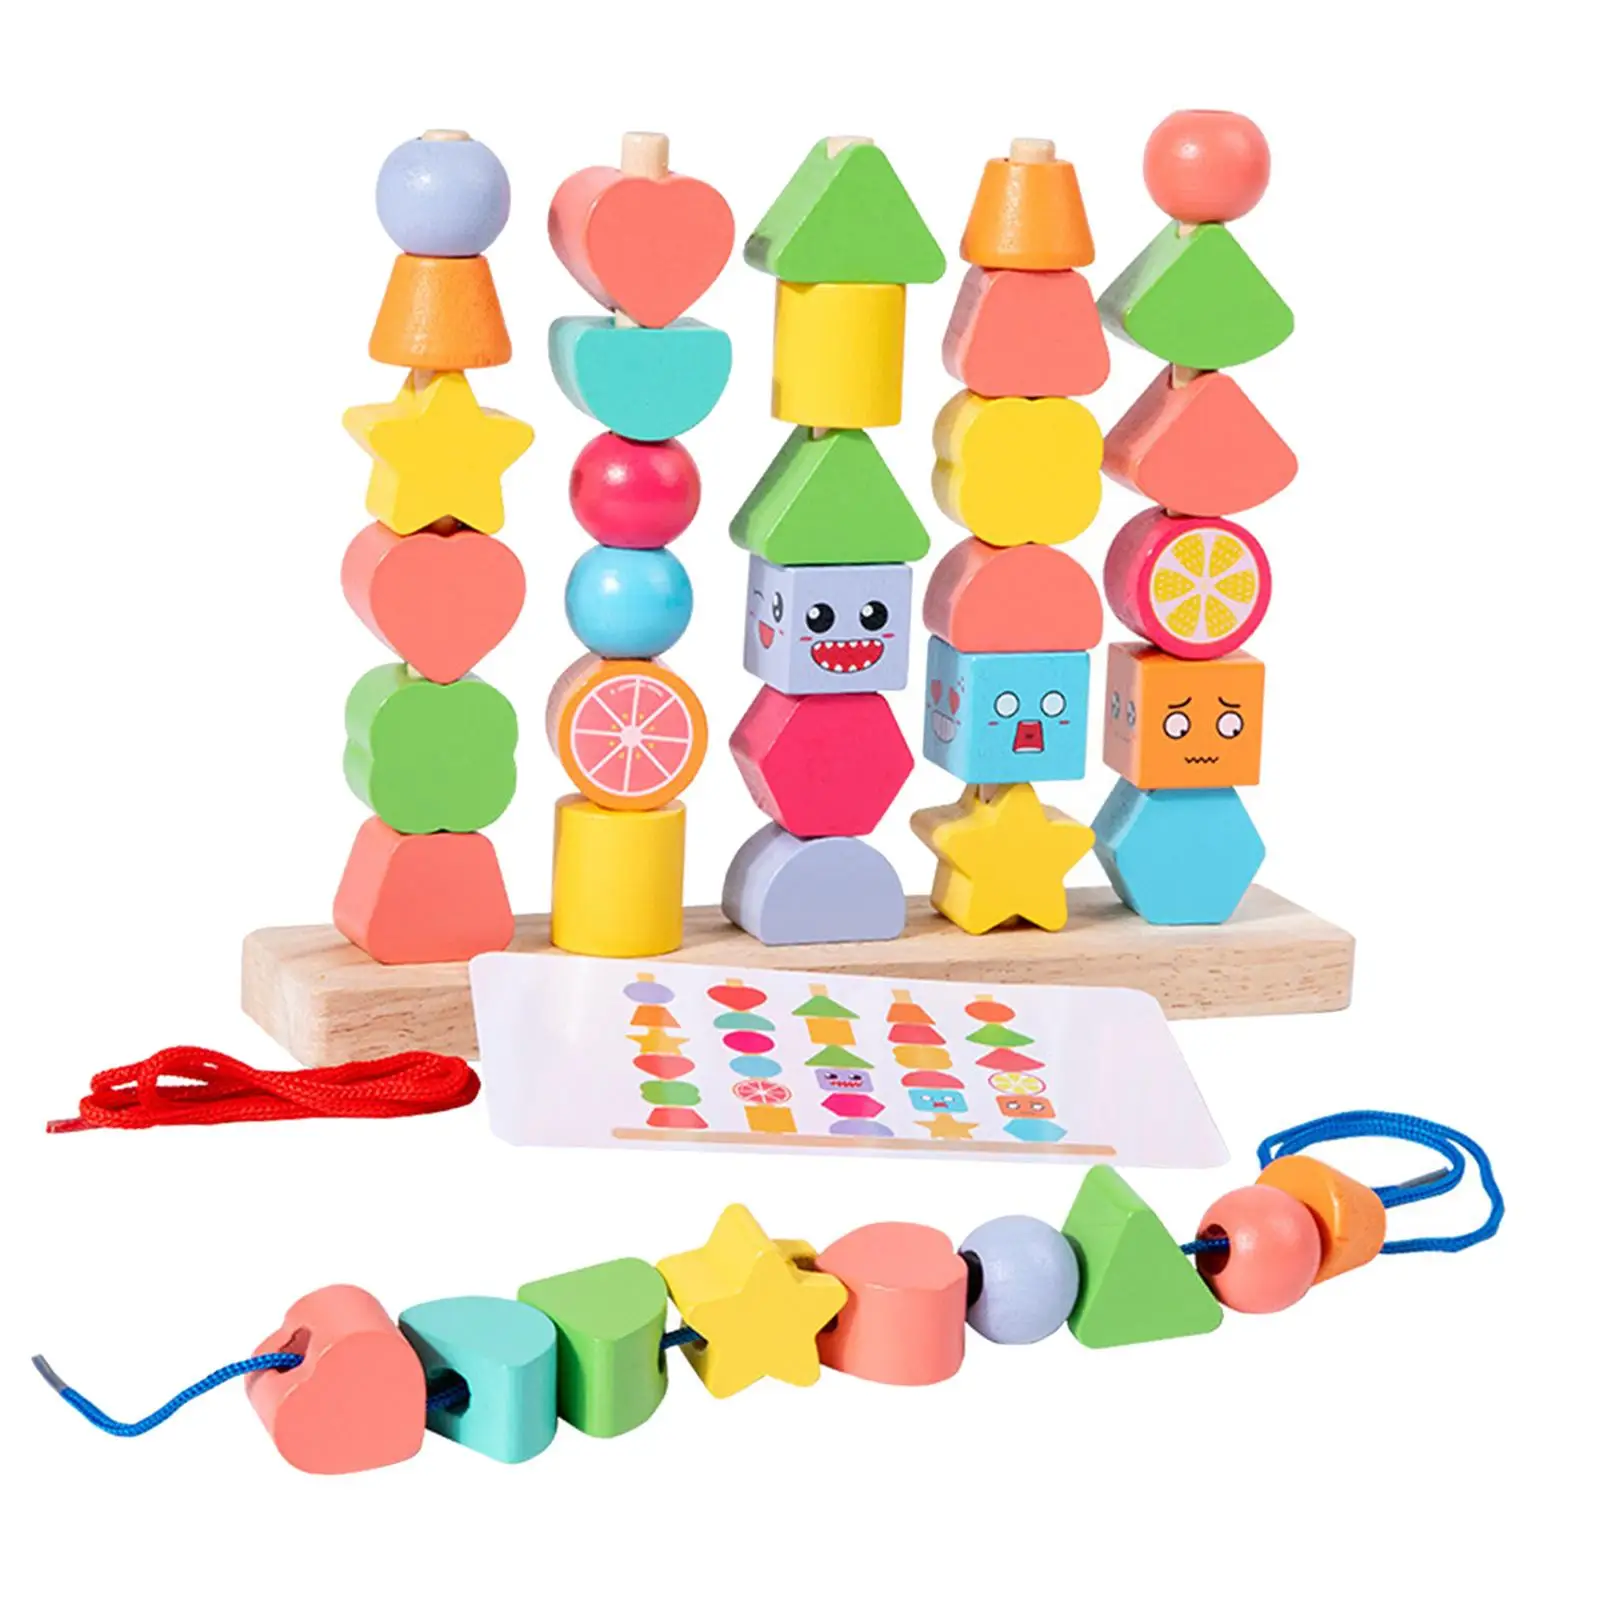 Wooden Beads Sequencing Toy Set Early Education Matching Shape Stacker Stacking Blocks for Children Kids Preschool Birthday Gift